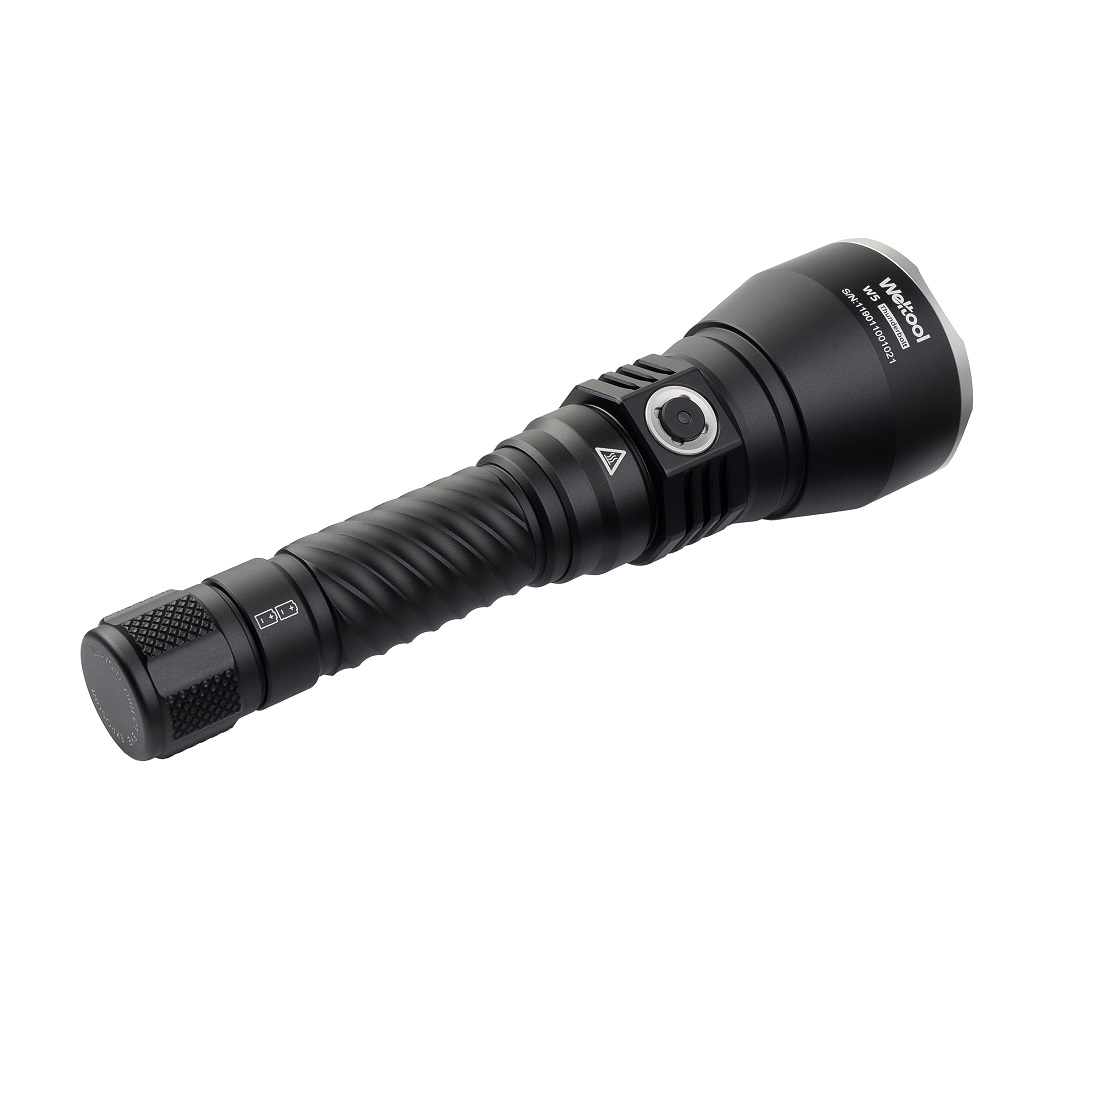 Weltool W5 699LM LEP Flashlight 2807M Long Shoot Search Flashlight Waterproof Strong LEP Spotlight With Battery